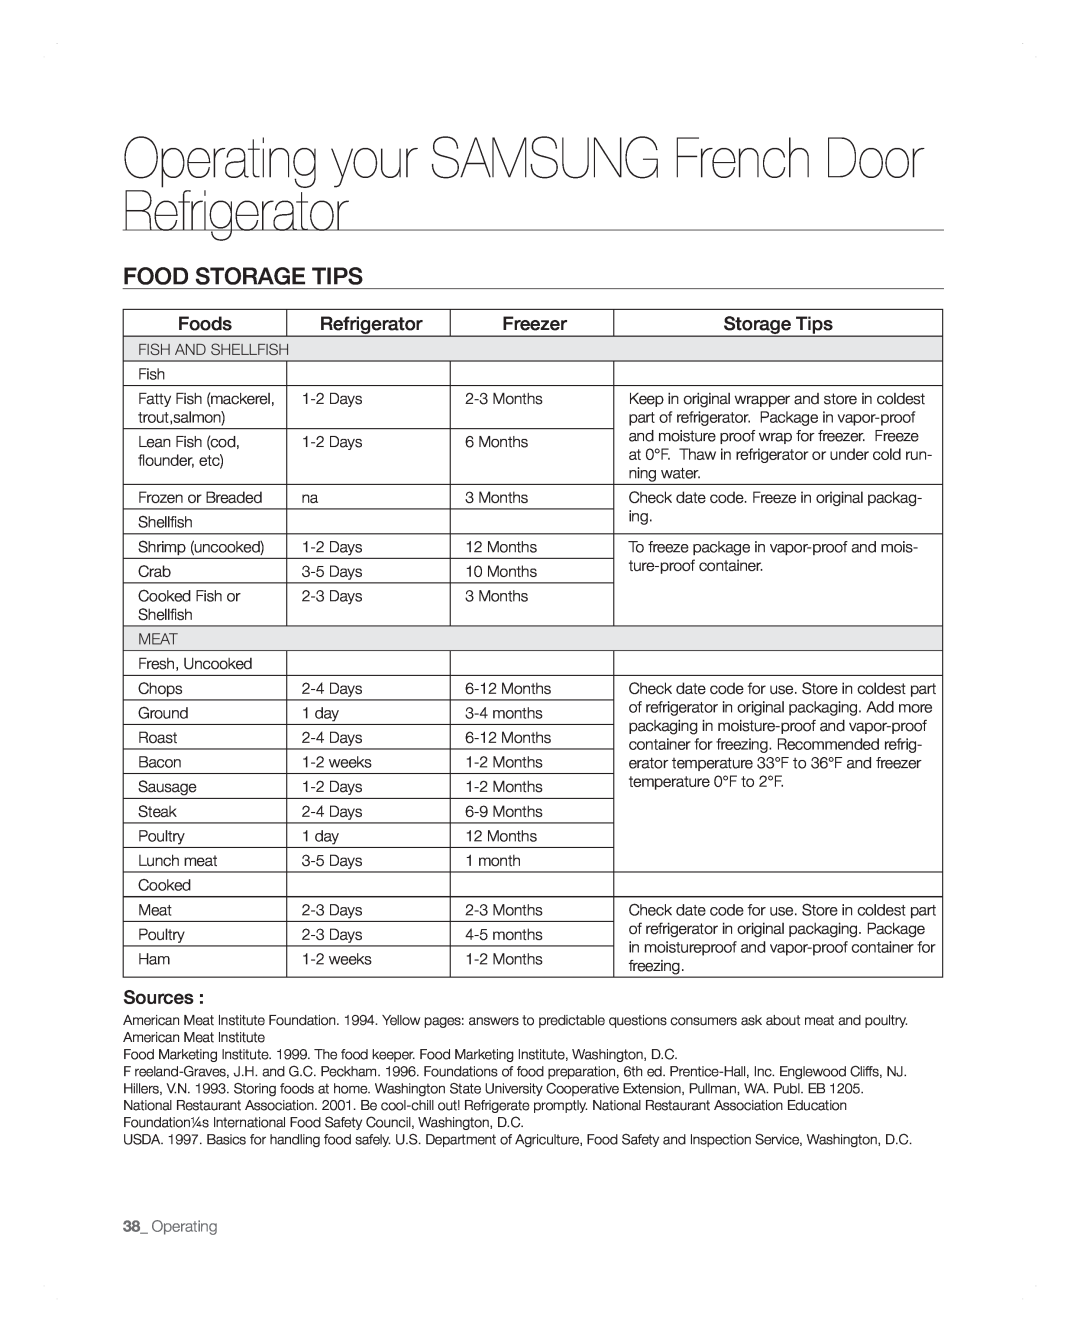 Samsung RFG297AARS user manual Operating your SAMSUNG French Door Refrigerator, Food Storage Tips, Foods, Freezer, Sources 